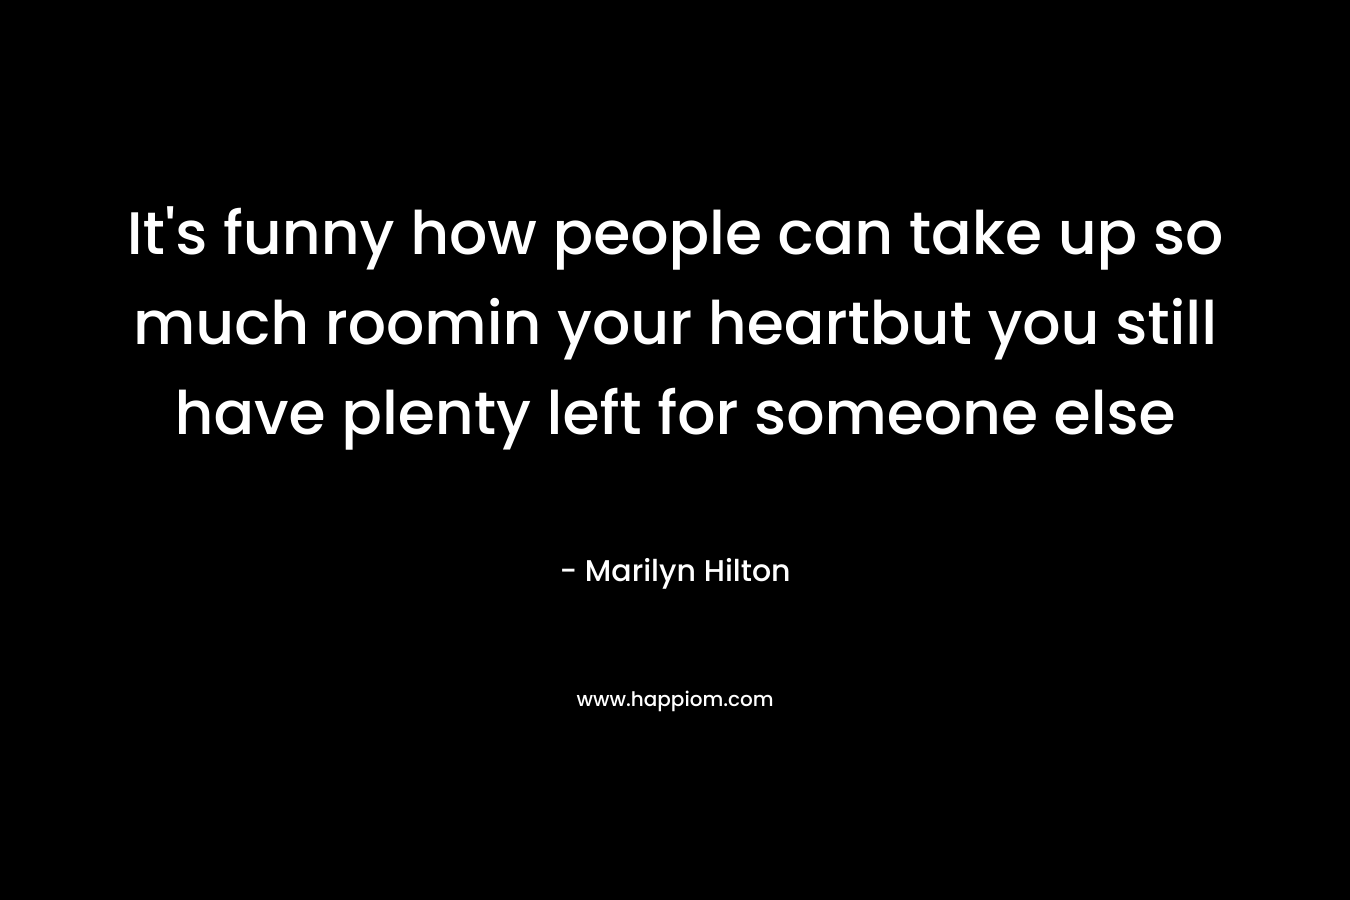 It’s funny how people can take up so much roomin your heartbut you still have plenty left for someone else – Marilyn Hilton